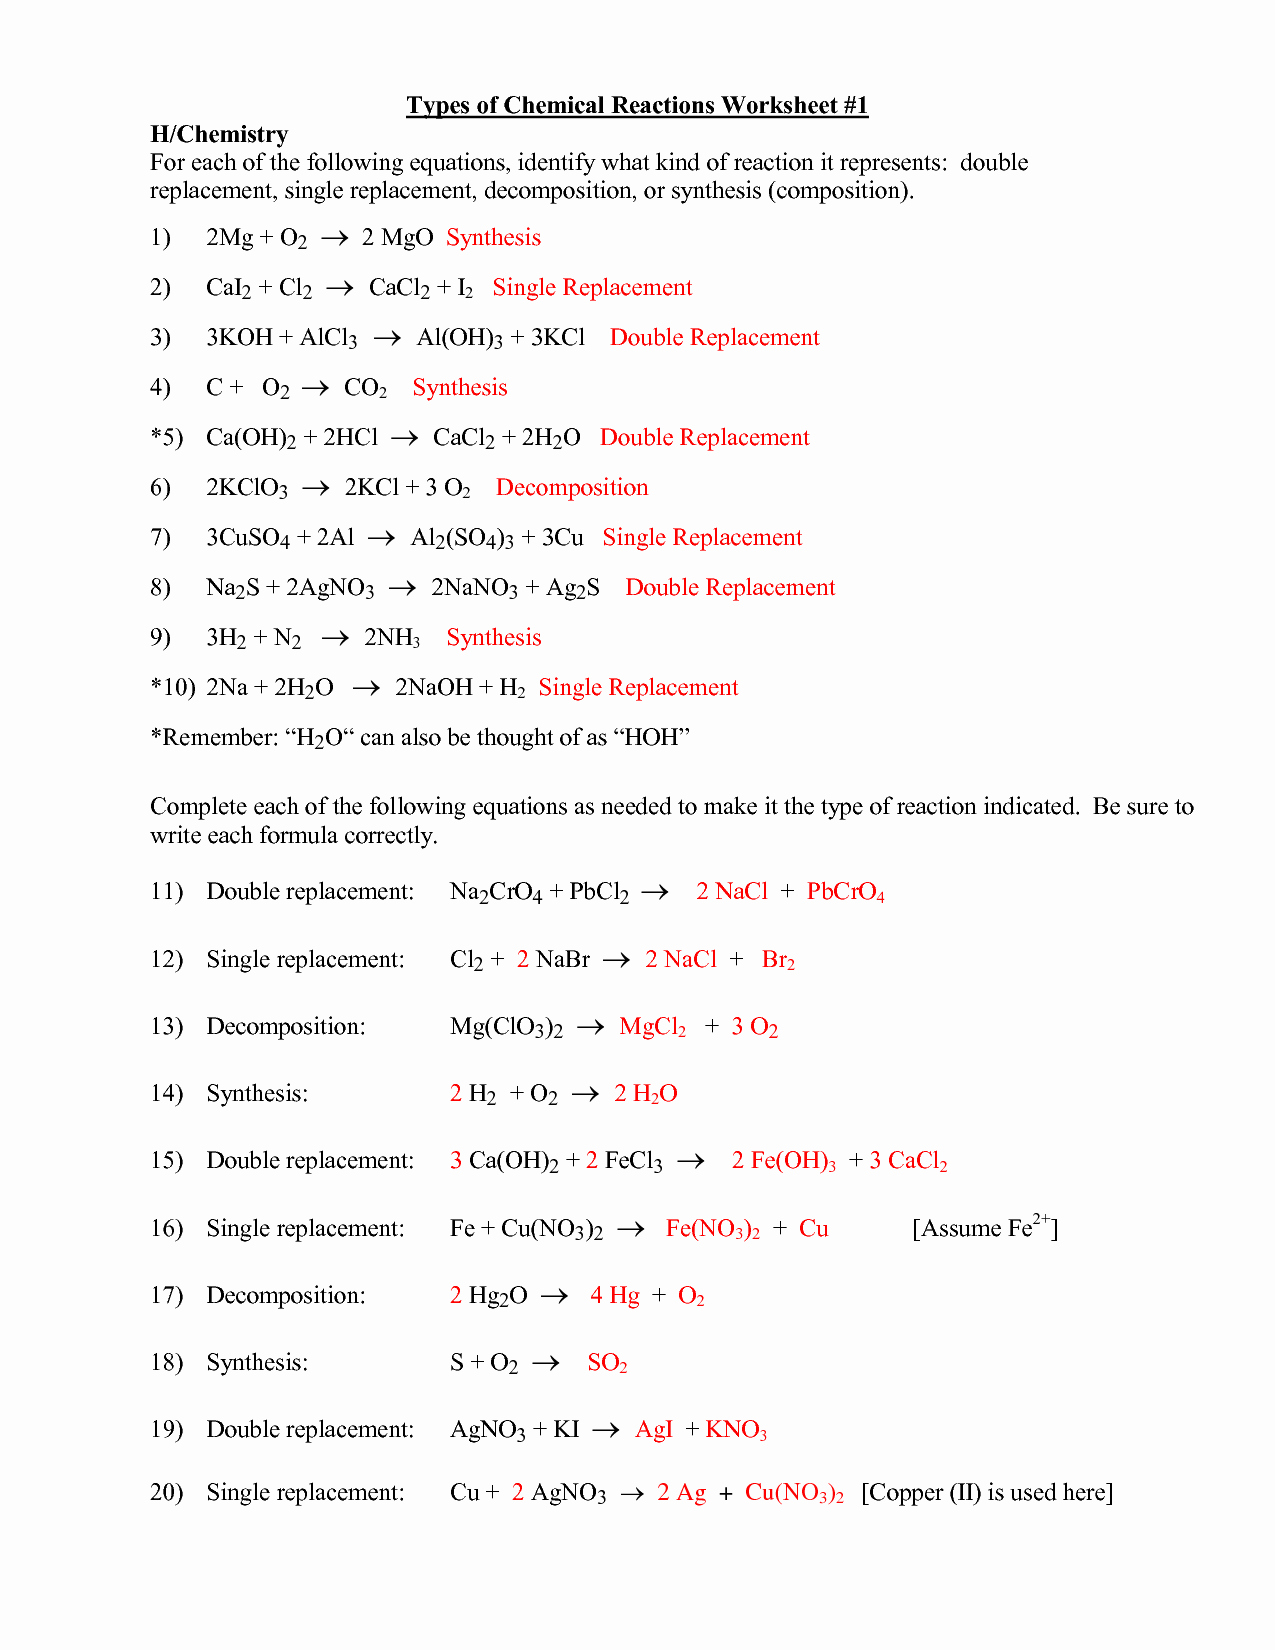 Chemical Reactions Types Worksheet Beautiful Printables Types Chemical Reactions Worksheet Answers